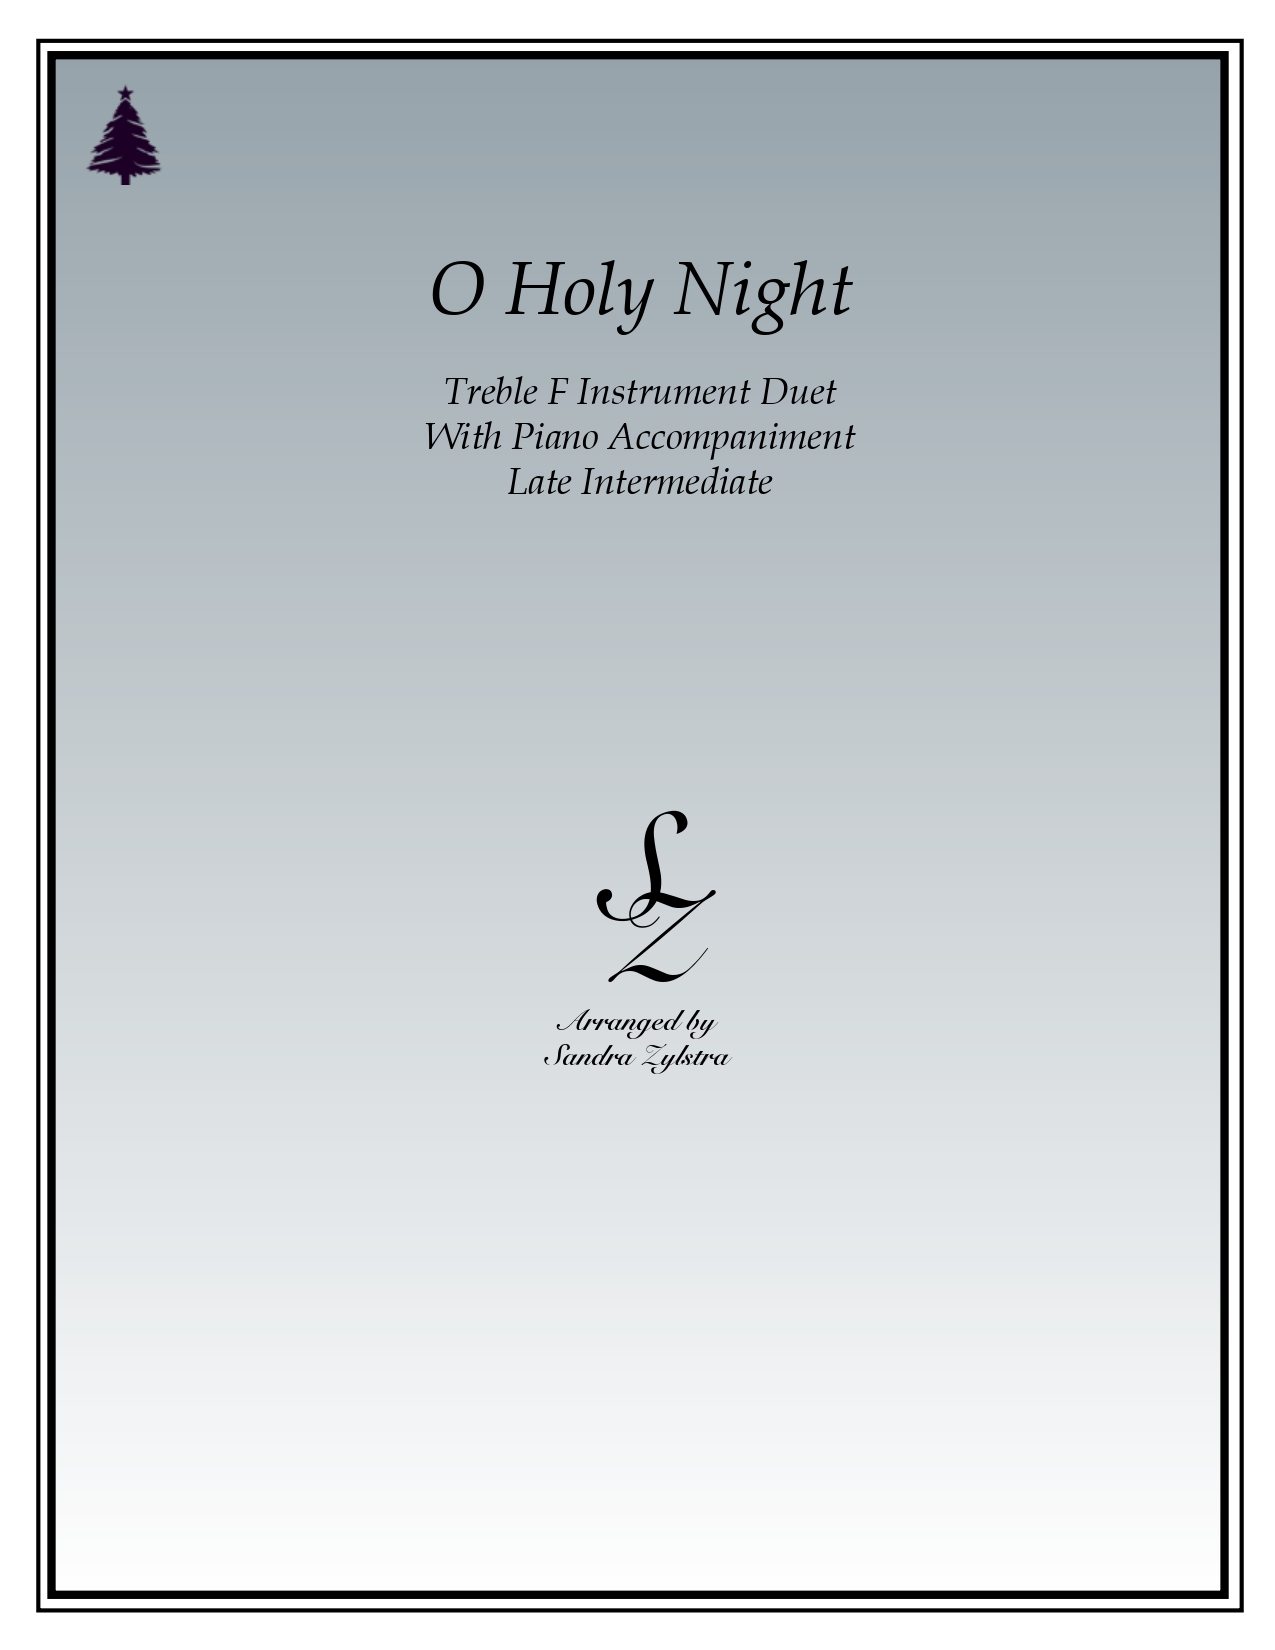 O Holy Night F instrument duet part cover page 00011